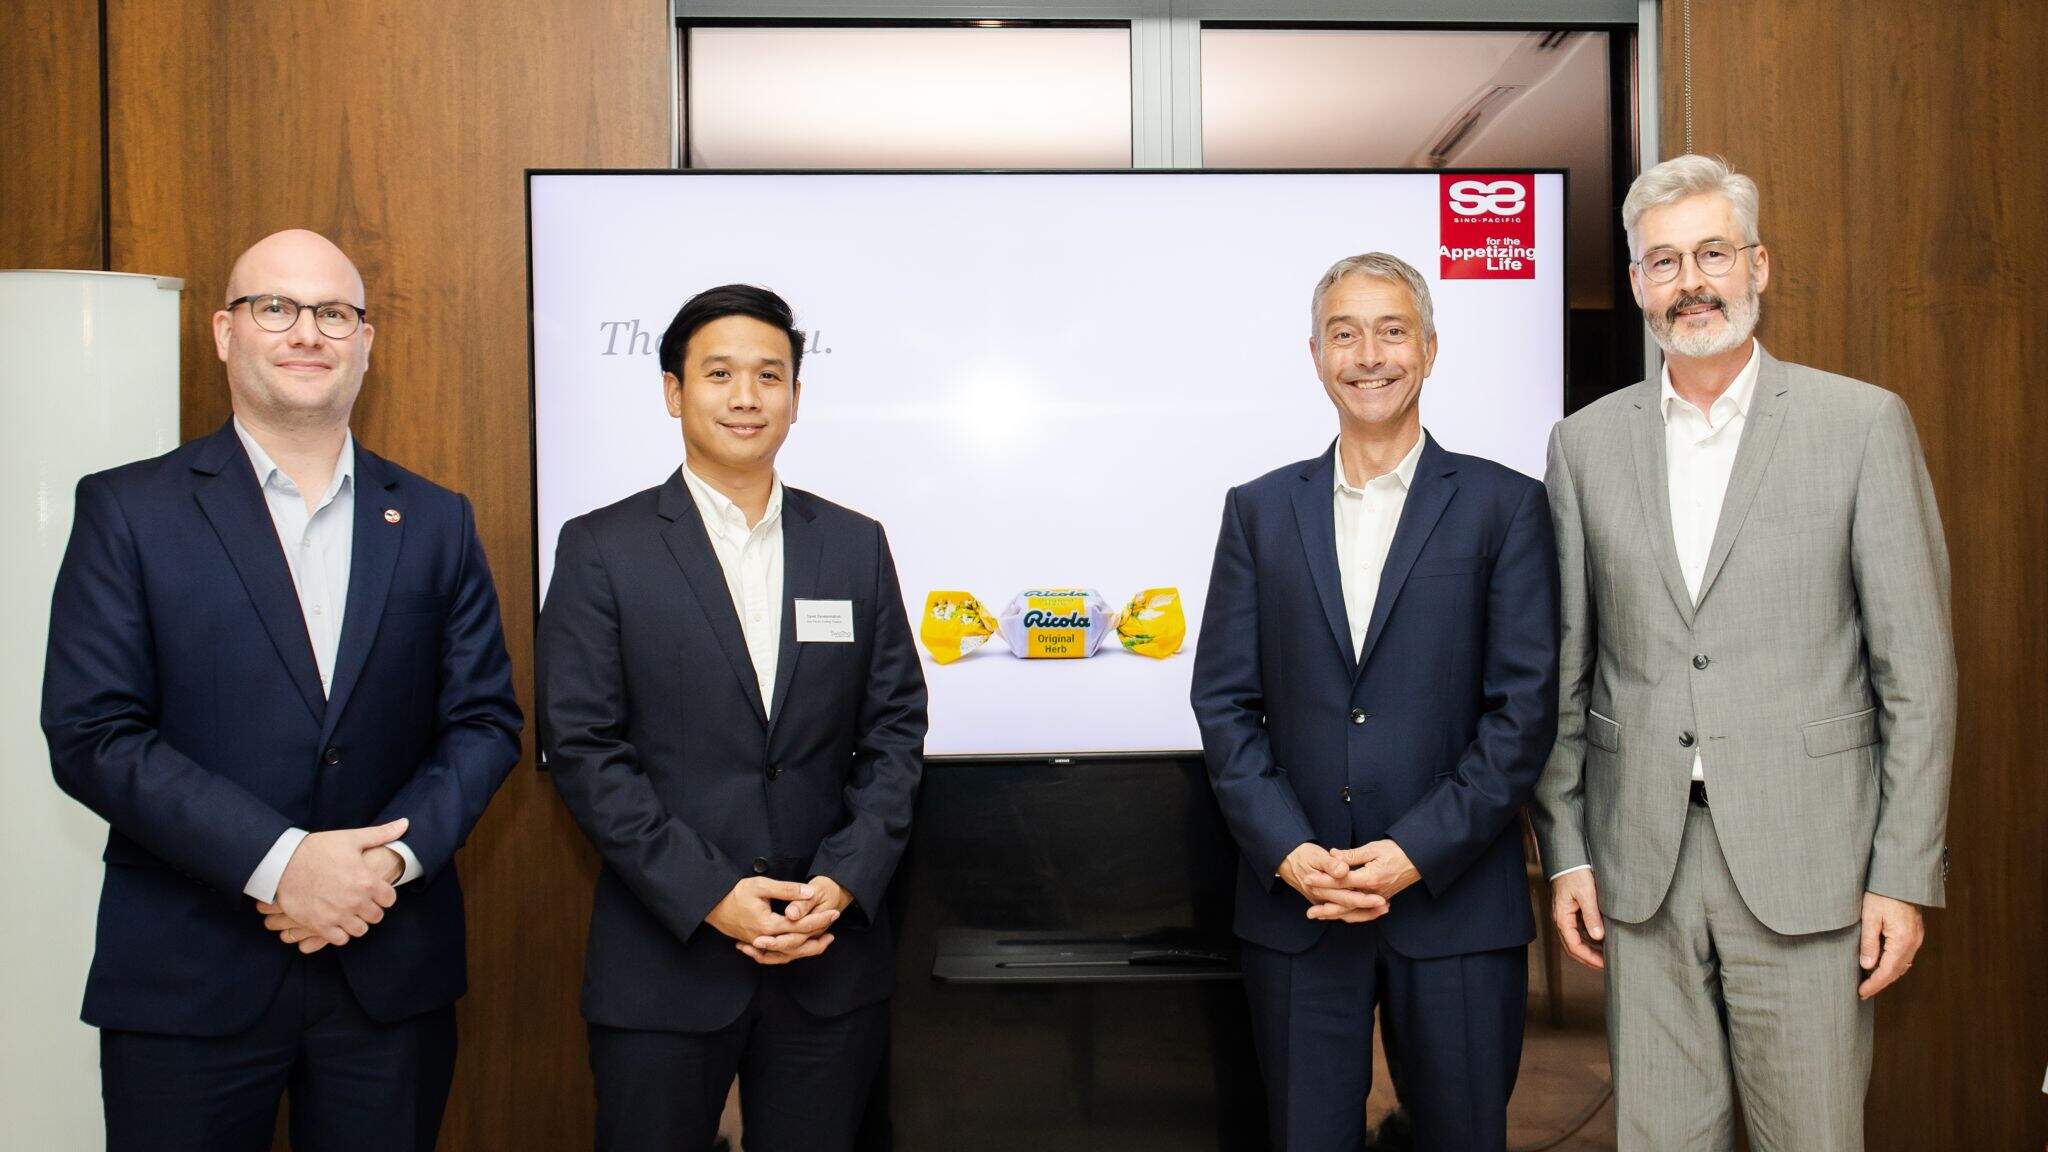 From left to right David Stauffacher, Executive Director Swiss-Thai Chamber of Commerce; Savet Savetsomphob, Senior Executive Director Sino Pacific Trading; Samuel Haller, Country Manager Dachser Air & Sea Logistics Switzerland and Pedro Zwahlen, Swiss Ambassador for the Kingdom of Thailand</span>